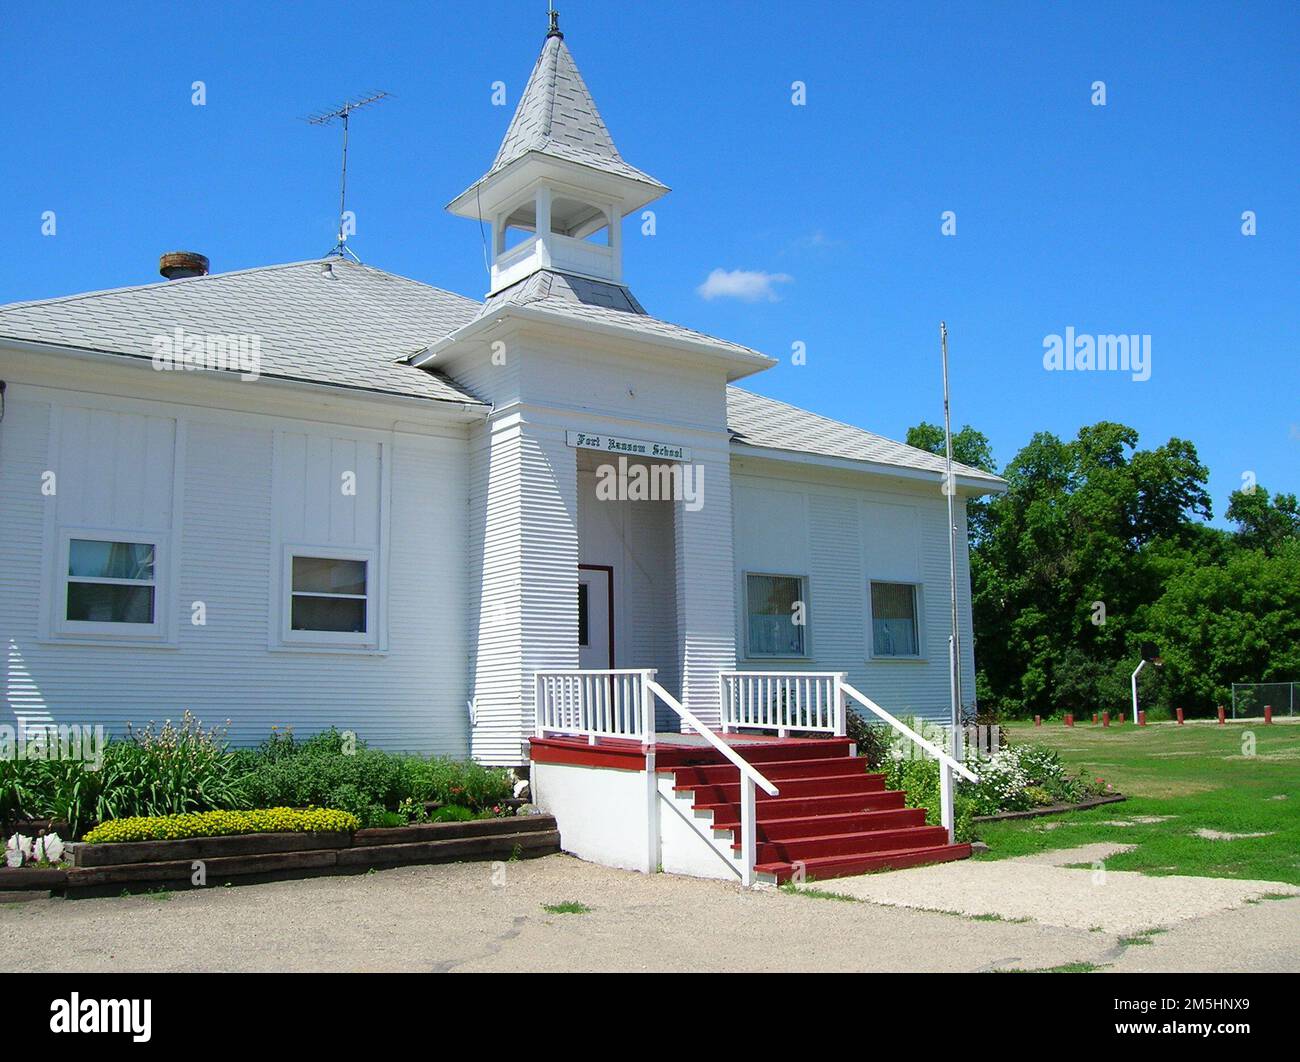 Sheyenne River Valley Scenic Byway - Schoolhouse in Fort Ransom. This historic schoolhouse in Fort Ransom (just north of the T.J. Walker Historic District) is just across the street from the Standing Rock Norwegian Evangelical Church. Location: Fort Ransom, North Dakota (46.520° N 97.927° W) Stock Photo